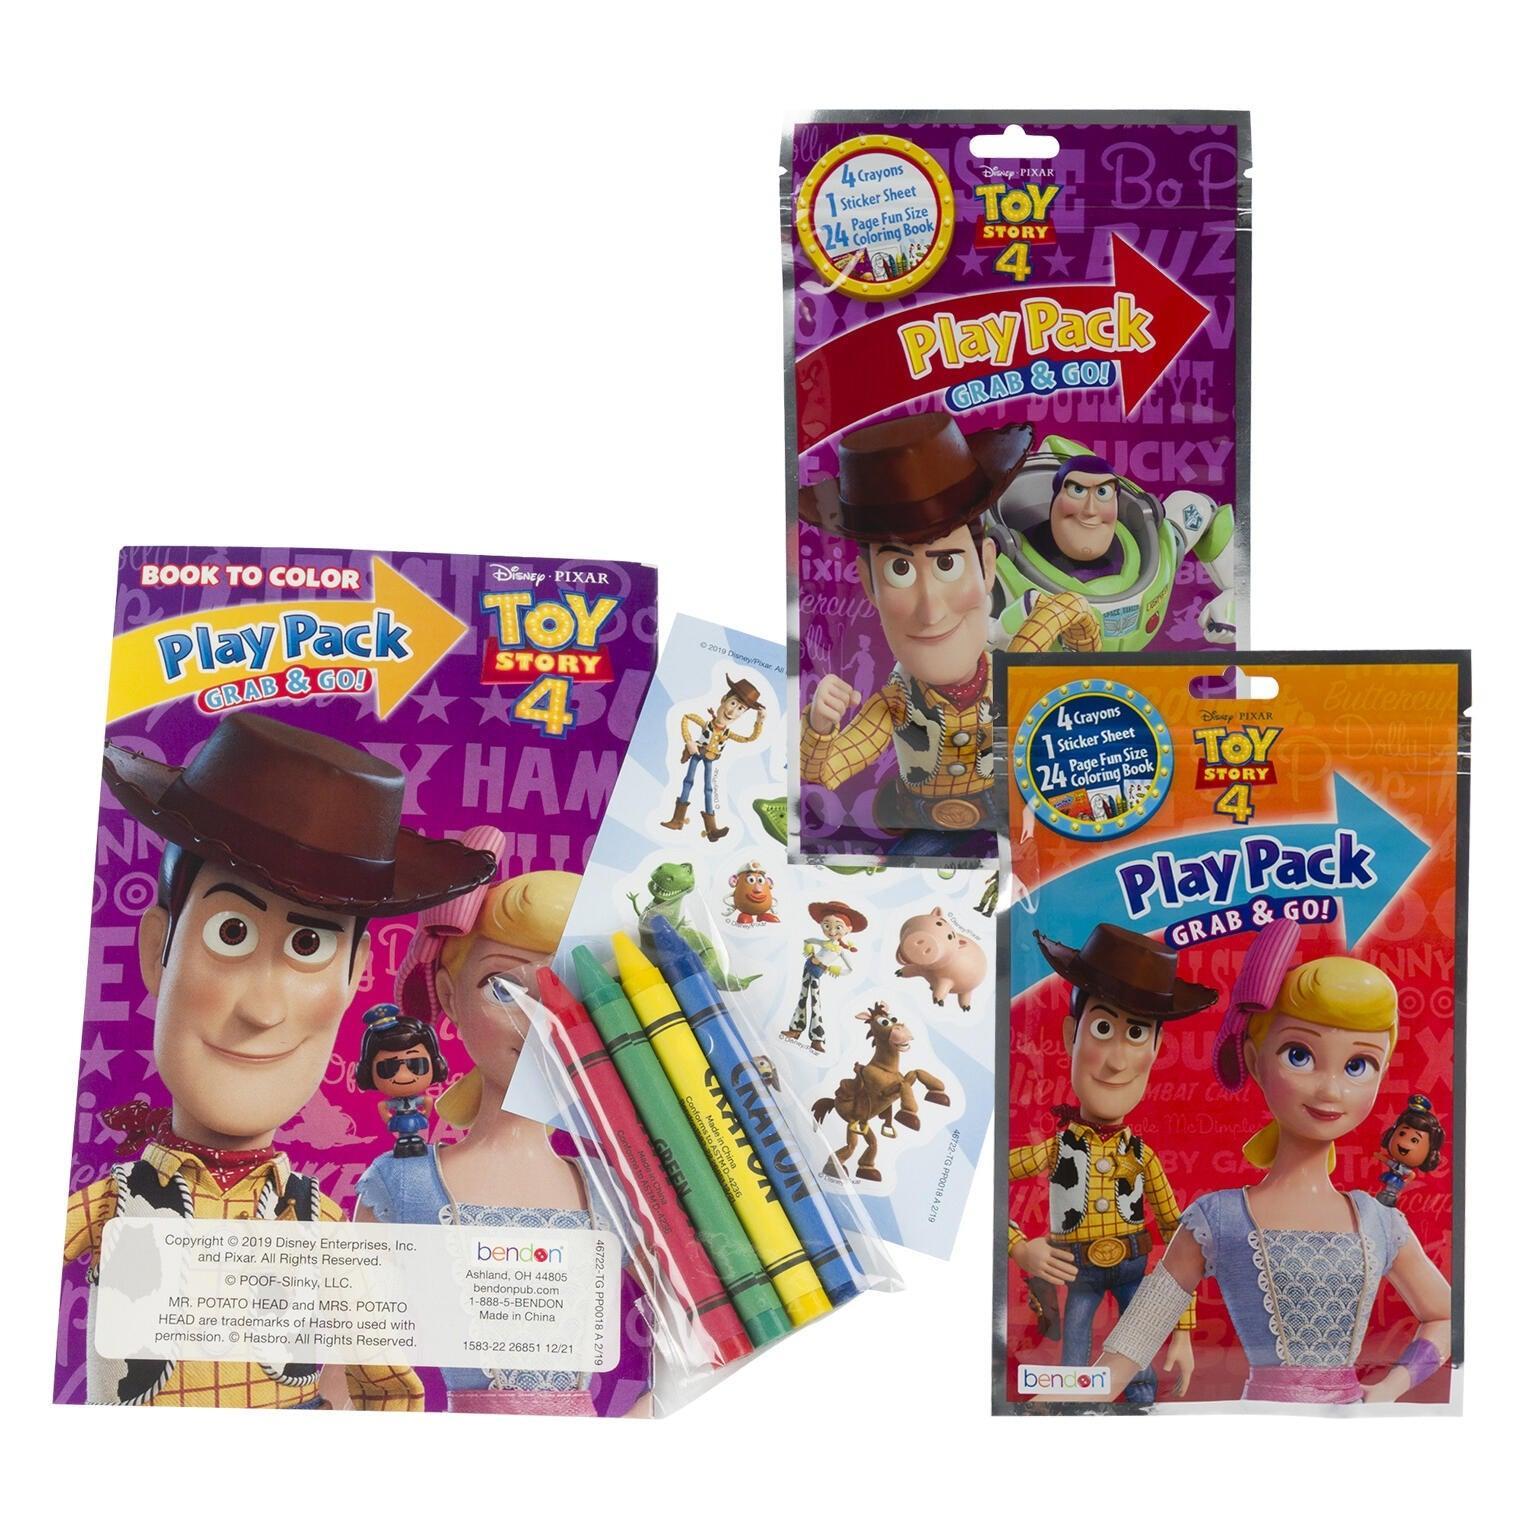 Toy Story 4 Play Pack